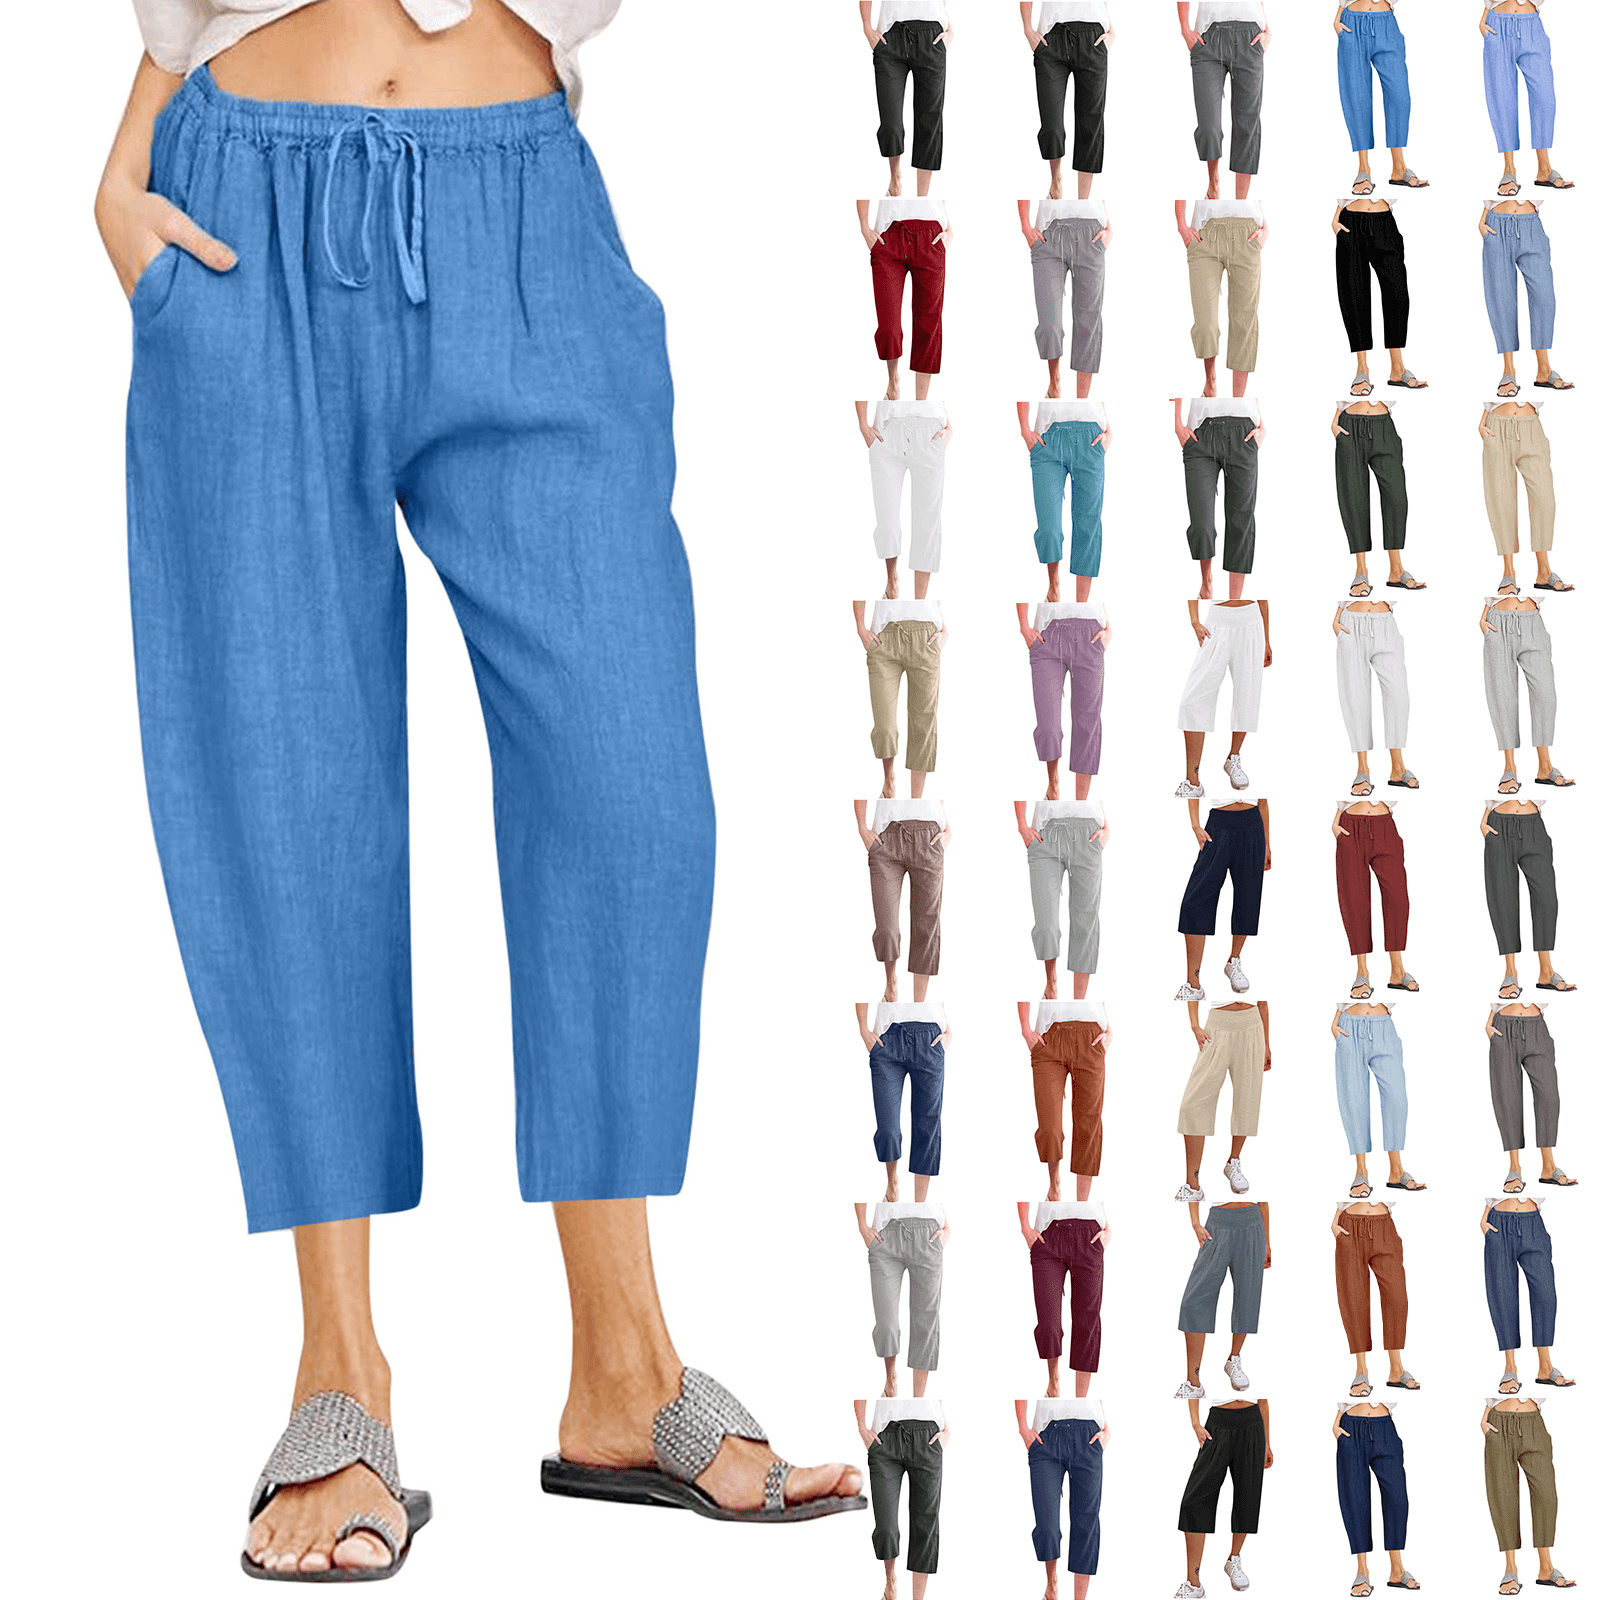 Xihbxyly Linen Pants for Women Womens Pants Cotton Linen Long Lounge Pants  Drawstring Back Elastic Waist Pants Casual Trousers with Pockets, Blue, M 1  Dollar Items for Girls #3 